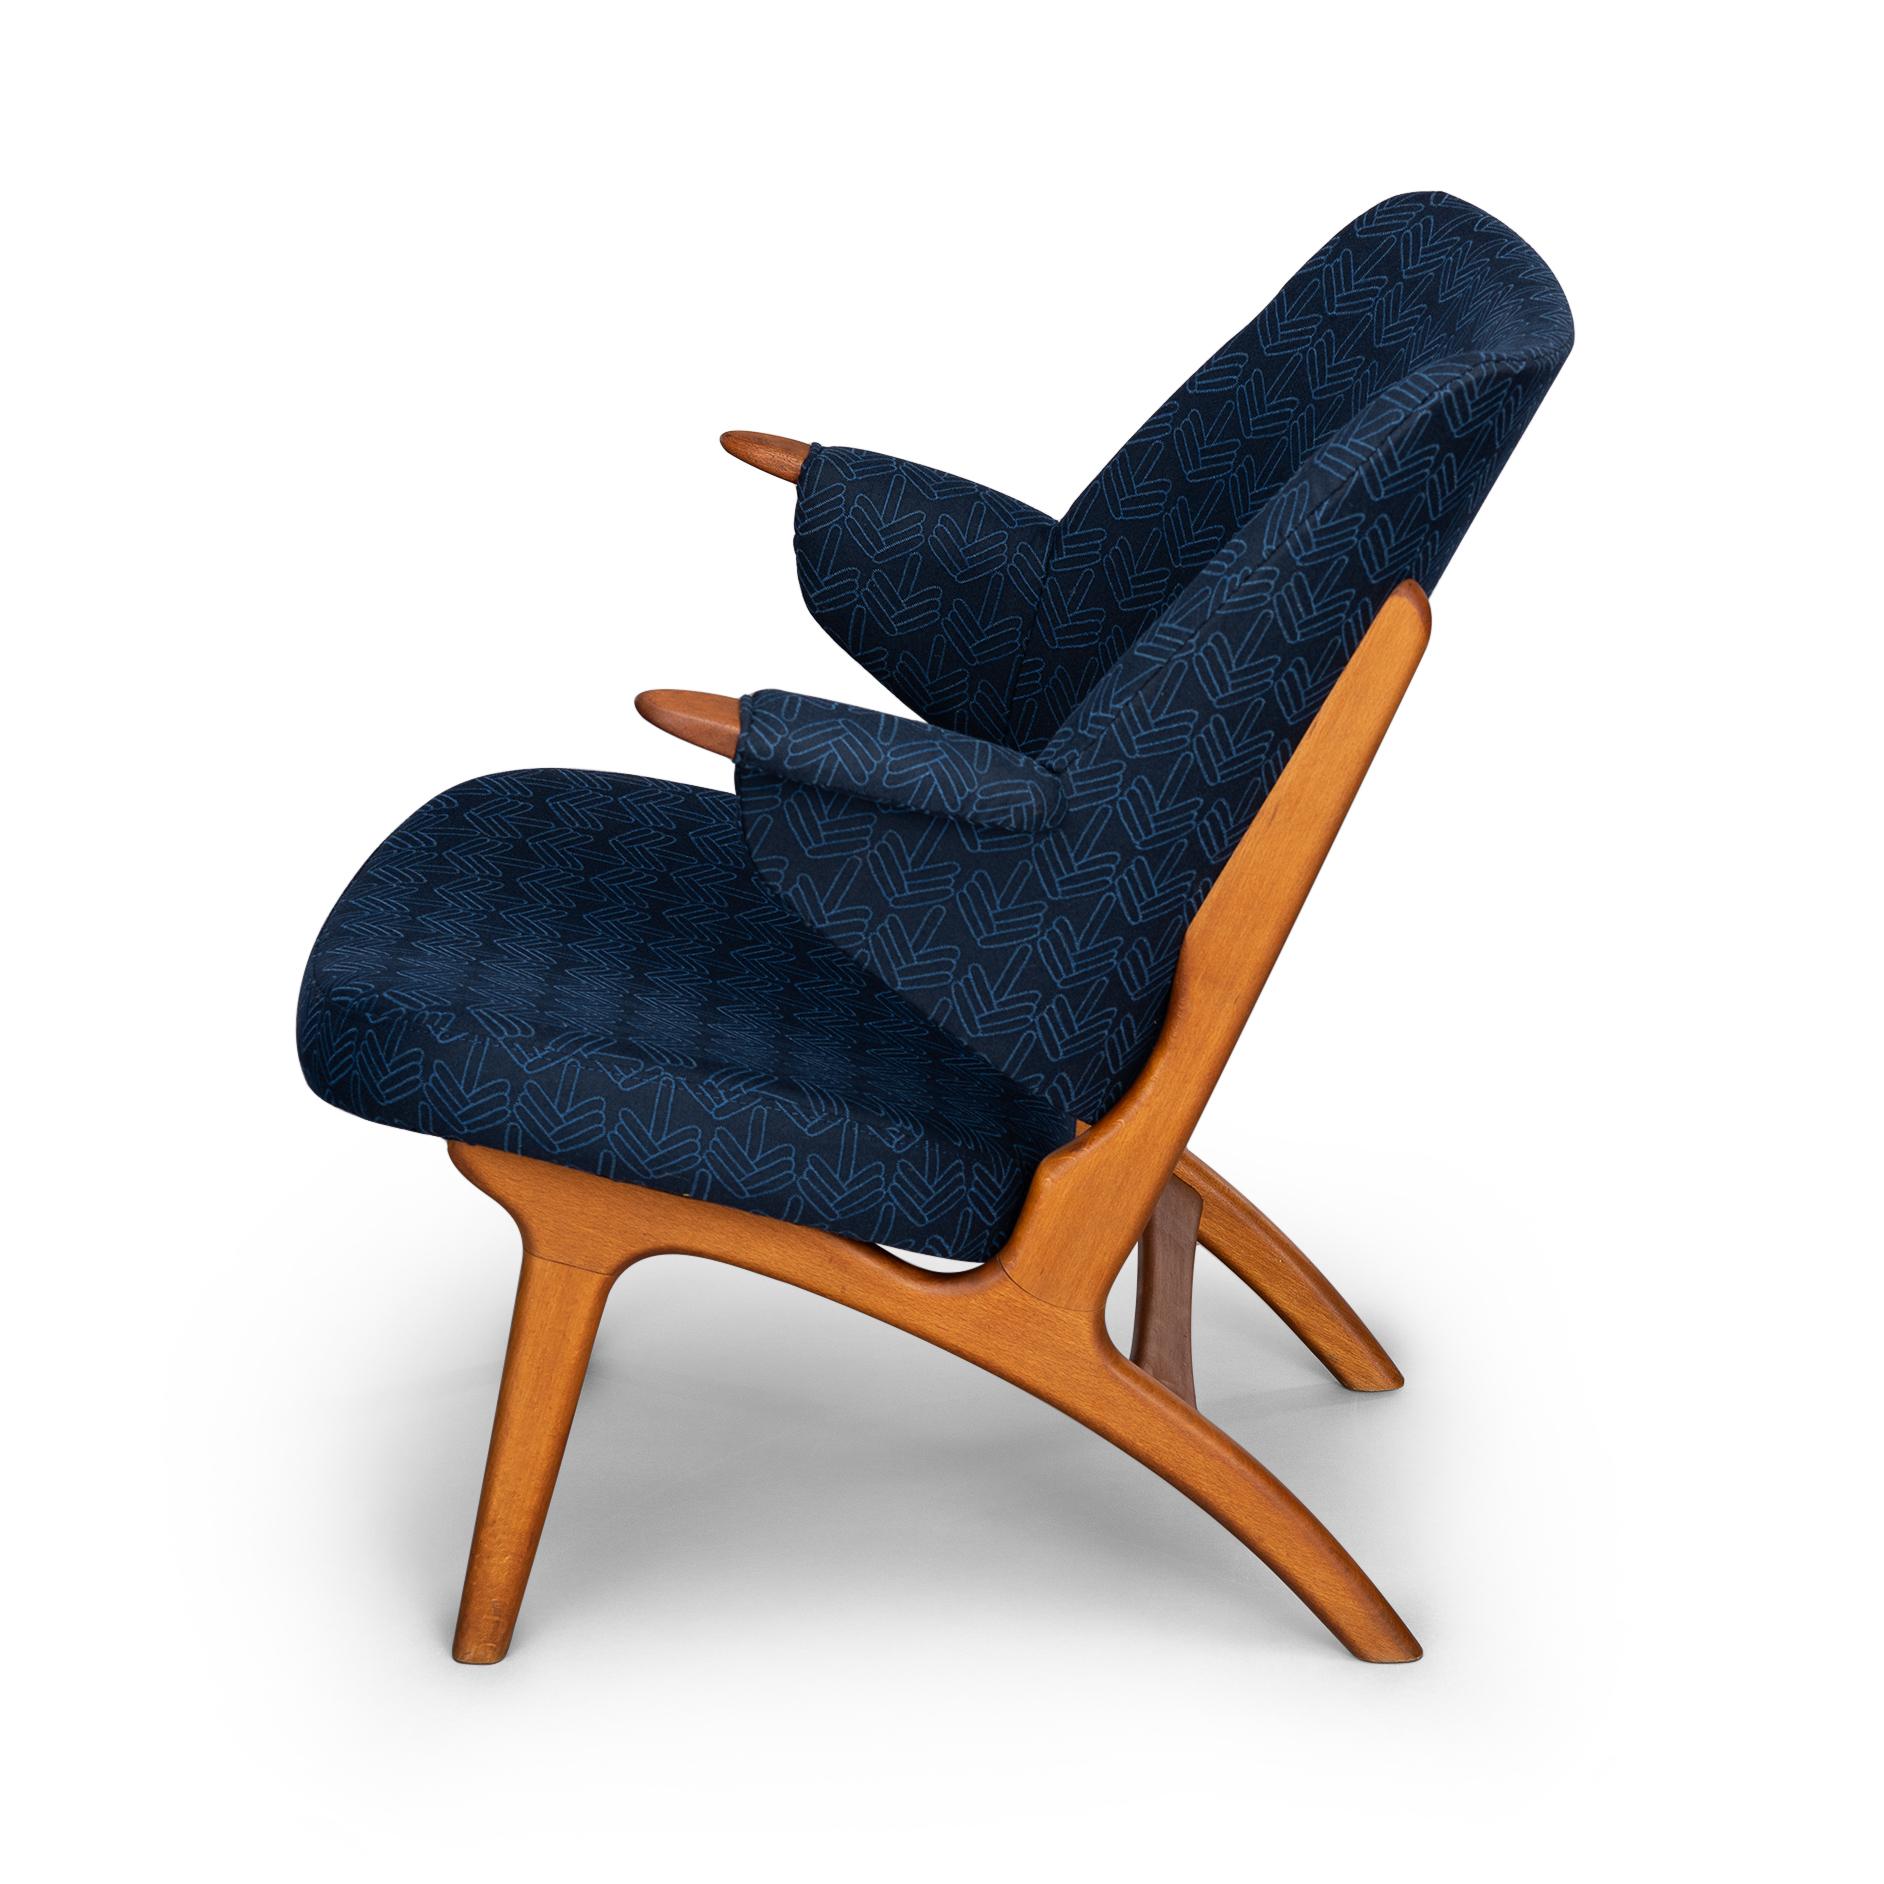 Mid-20th Century Vintage Danish Blue Model No. 14L Armchair from Poul Hundevad, 1950s